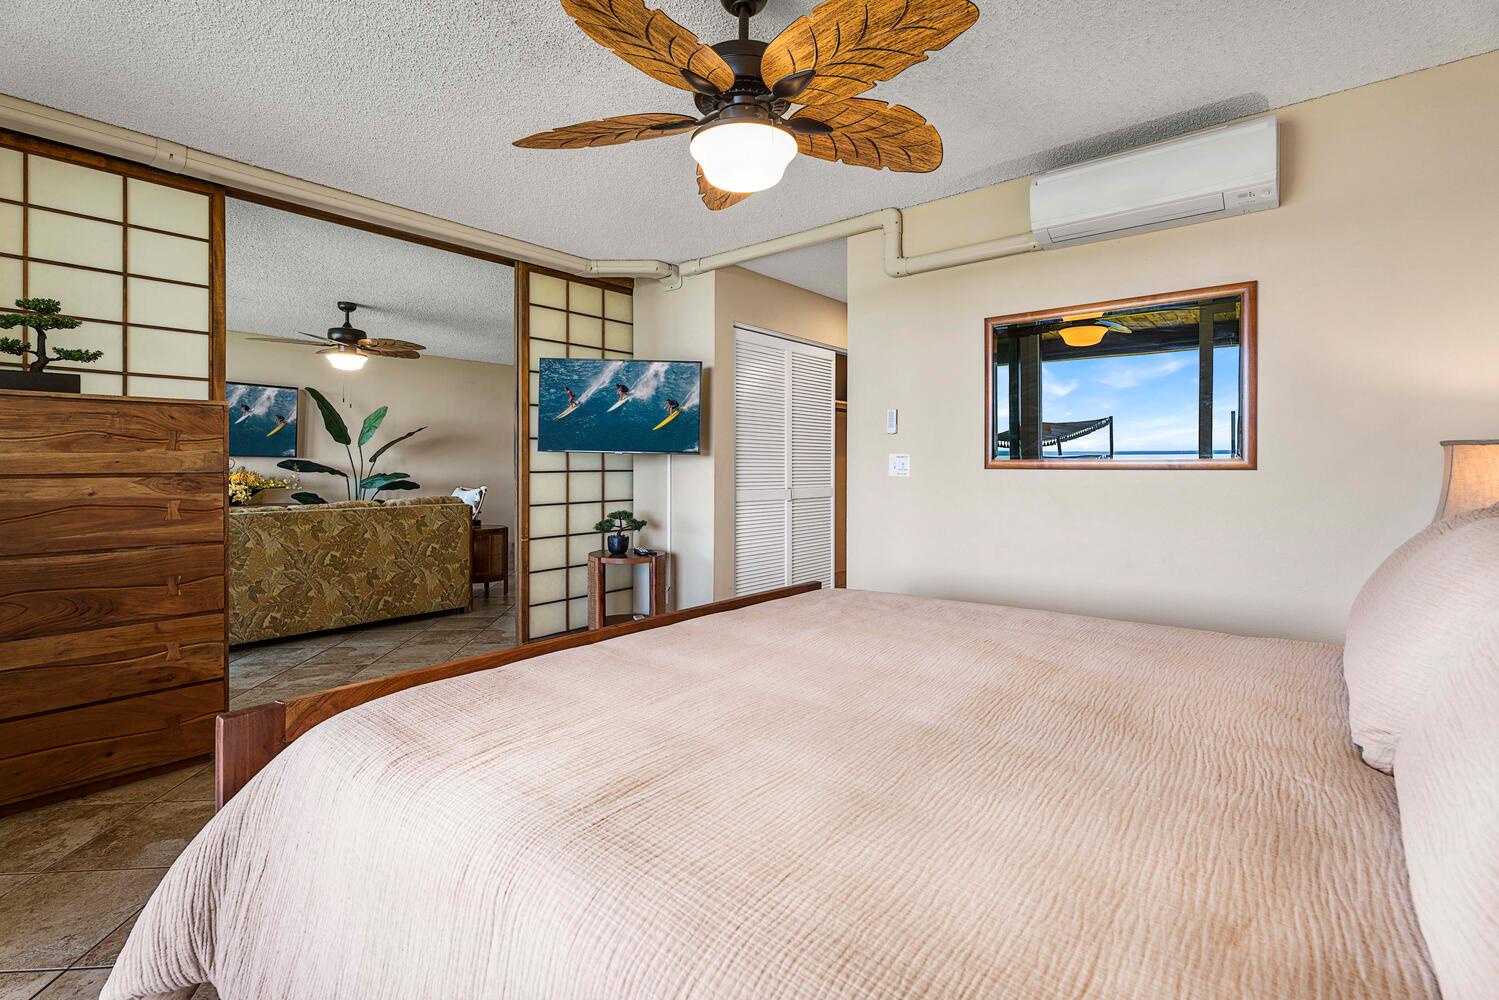 Kailua Kona Vacation Rentals, Keauhou Kona Surf & Racquet 1104 - Cozy guest room with cable TV, conveniently located next to the vibrant living area for easy relaxation and entertainment.